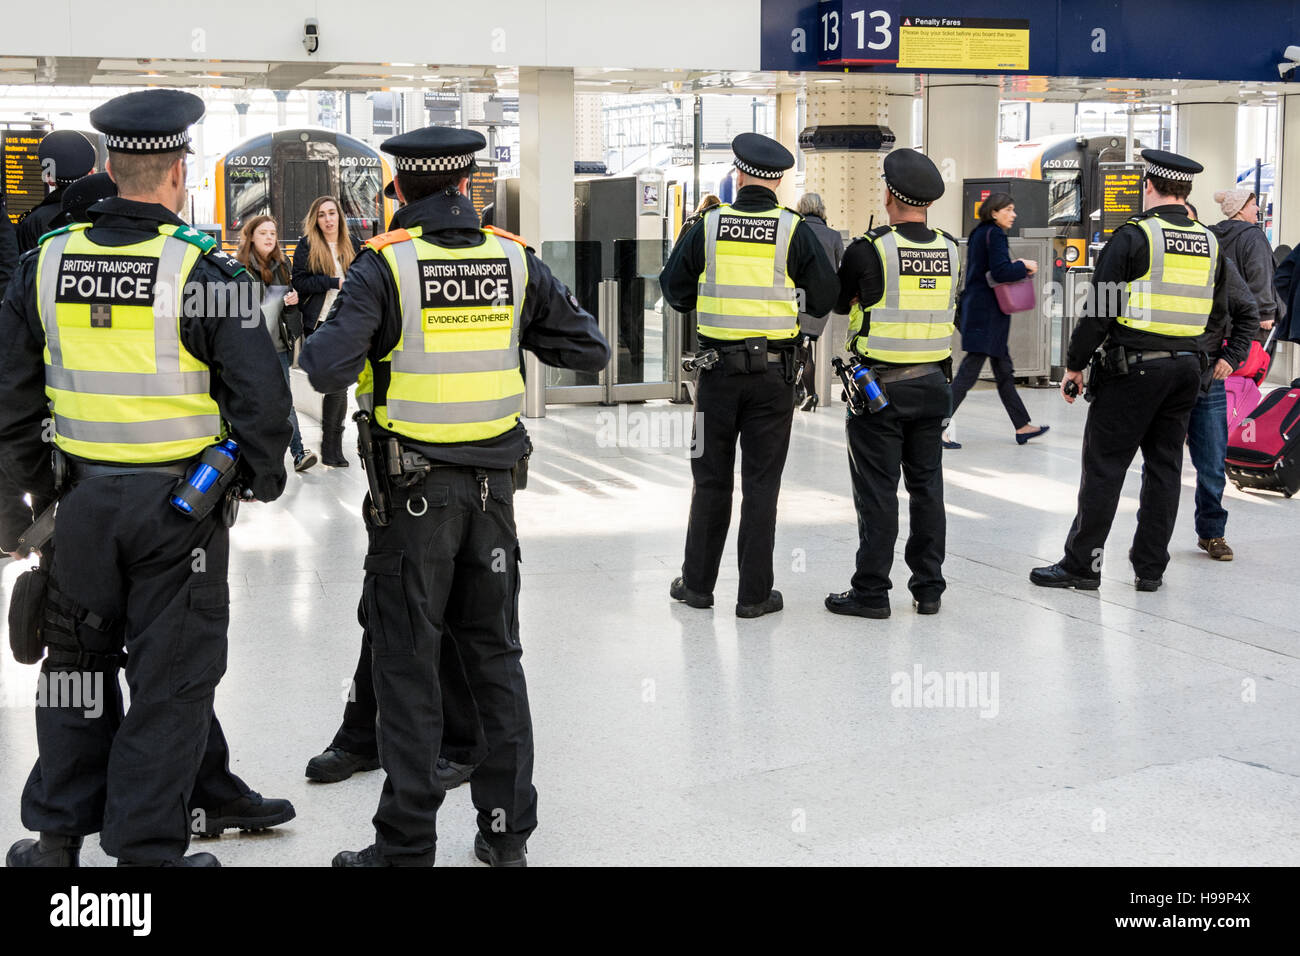 British Transport Police waiting for Scottish football supporters at Waterloo Station in London, England, UK Stock Photo